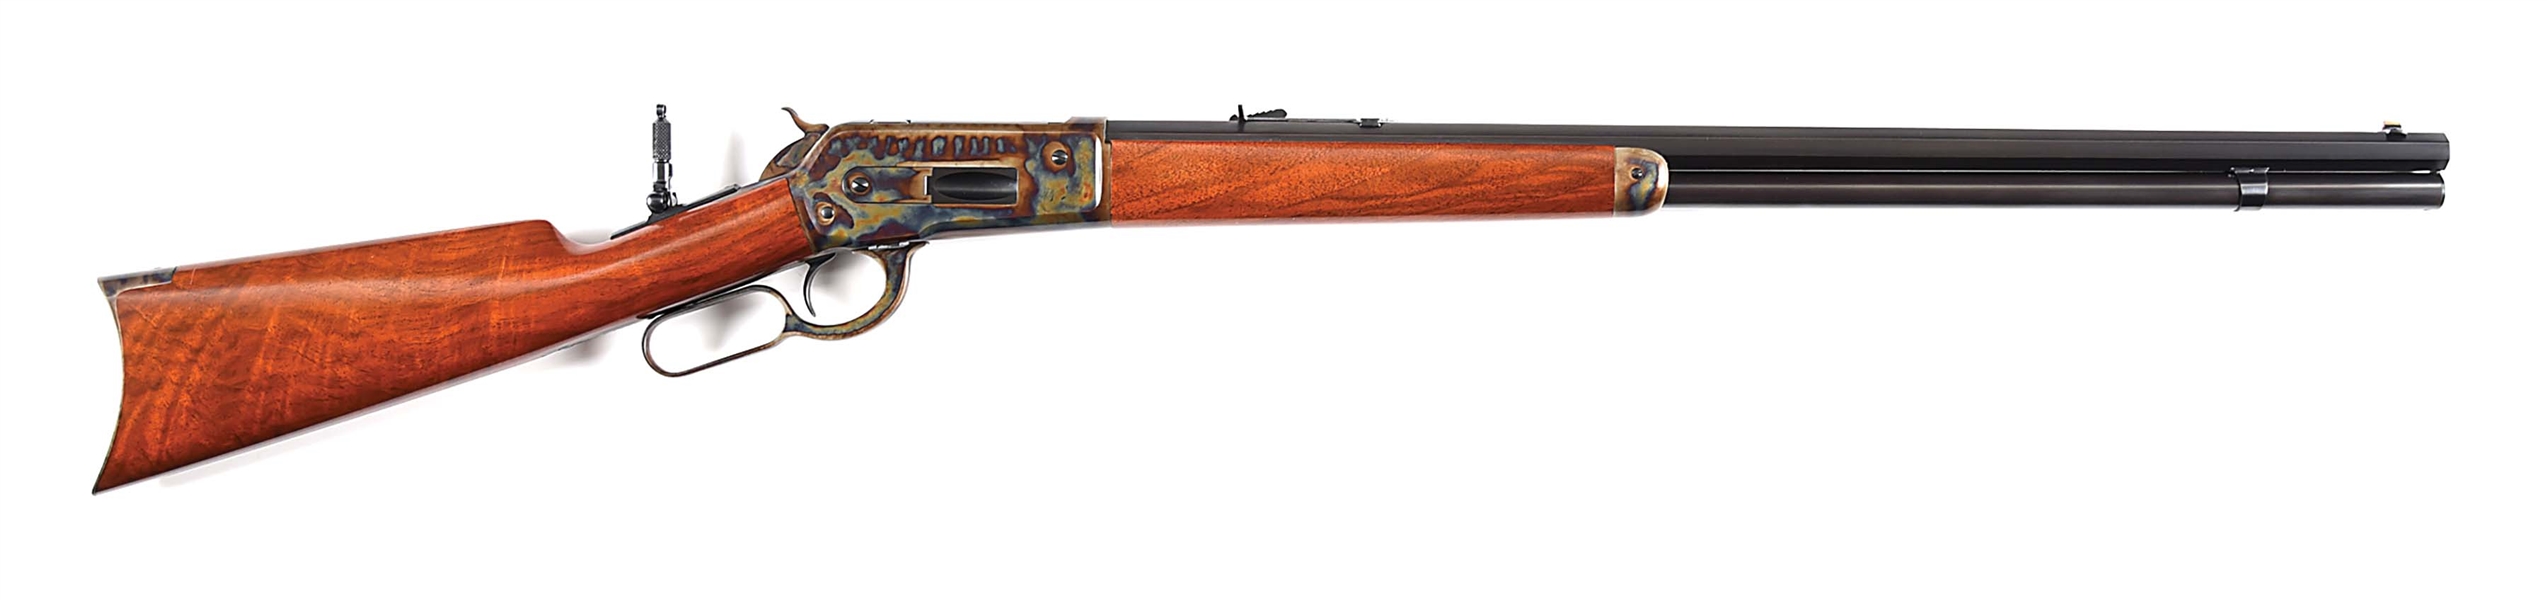 (C) TURNBULL RESTORED WINCHESTER MODEL 1886 LEVER ACTION RIFLE IN .40-65 W.C.F.